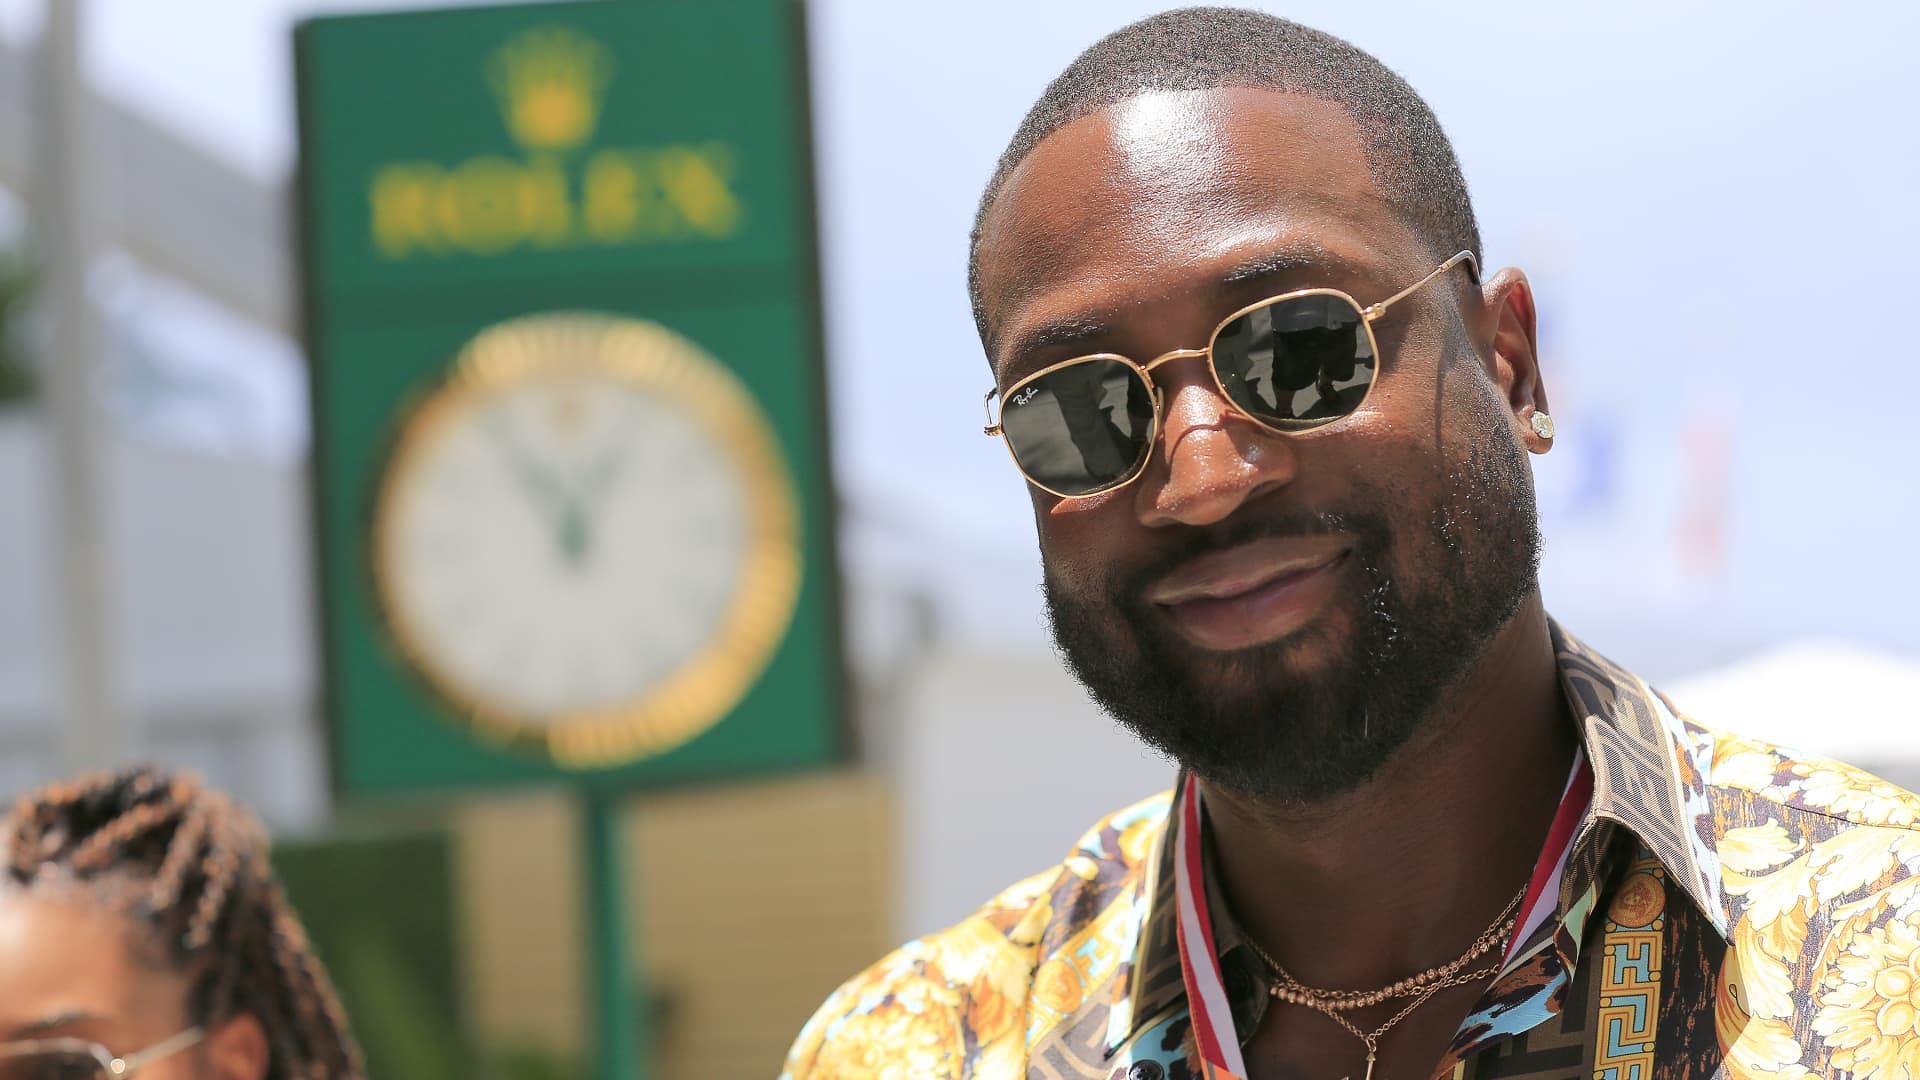 How 'solitude' and 'self-awareness' helped Dwyane Wade bounce back from hard times